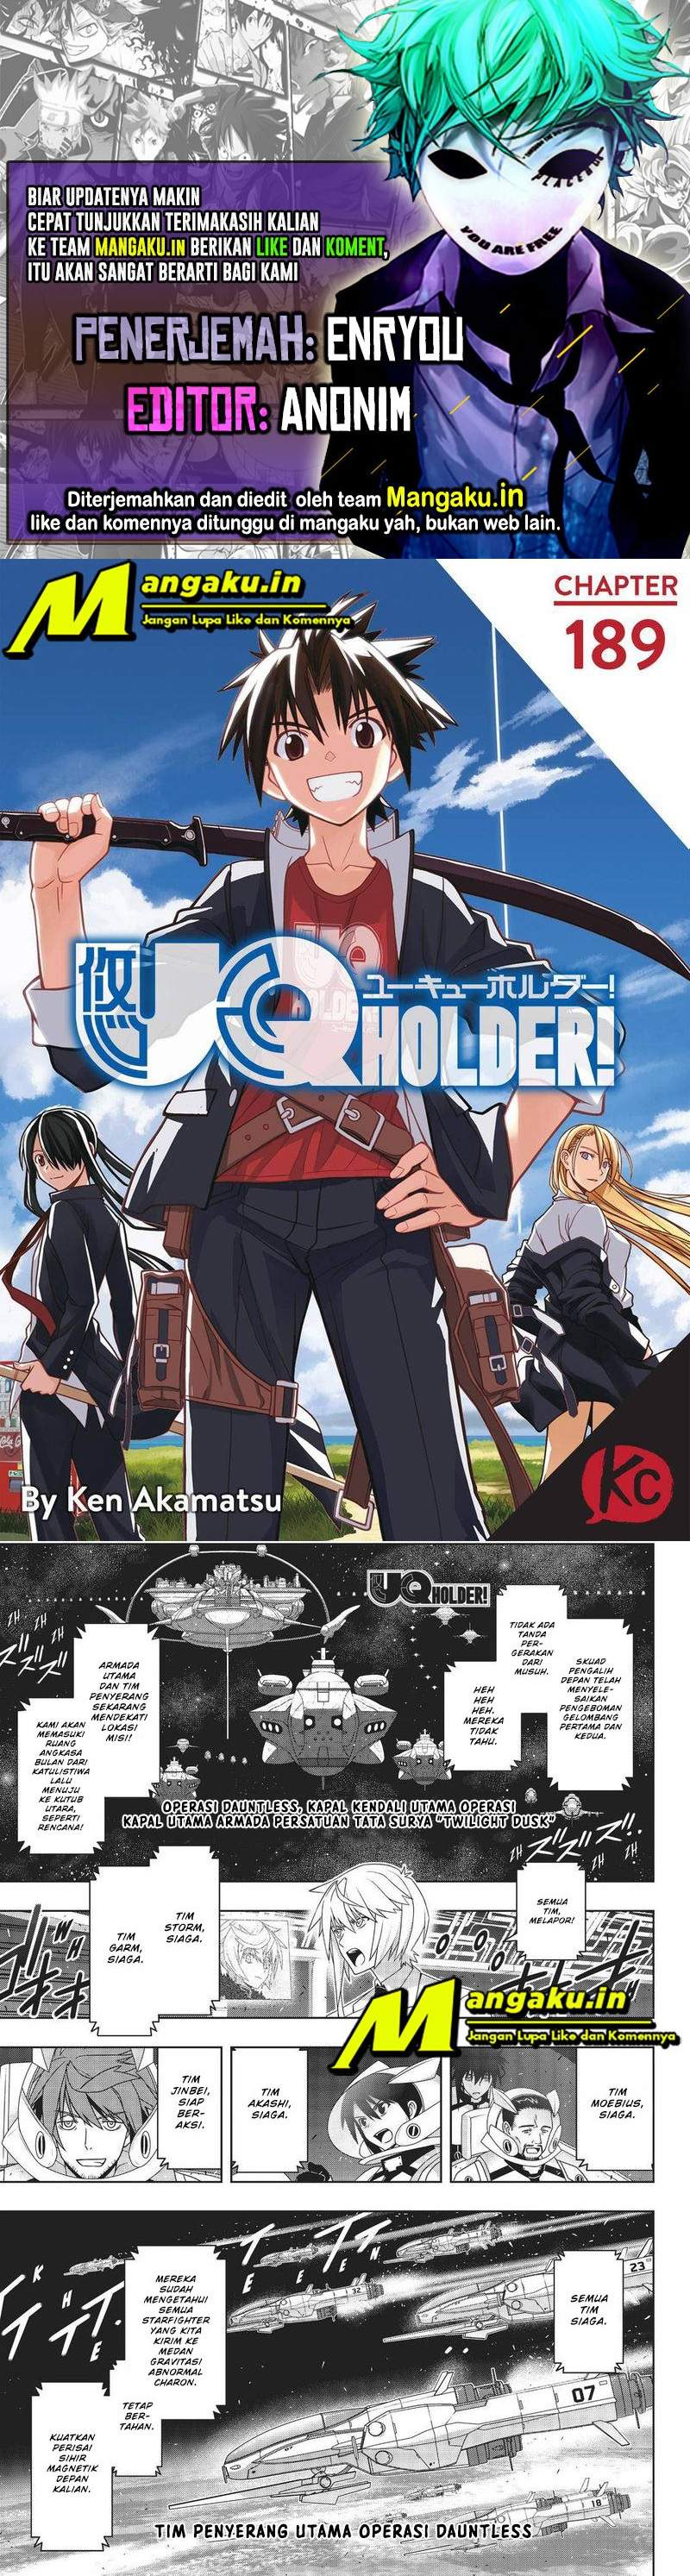 UQ Holder!: Chapter 189.1 - Page 1